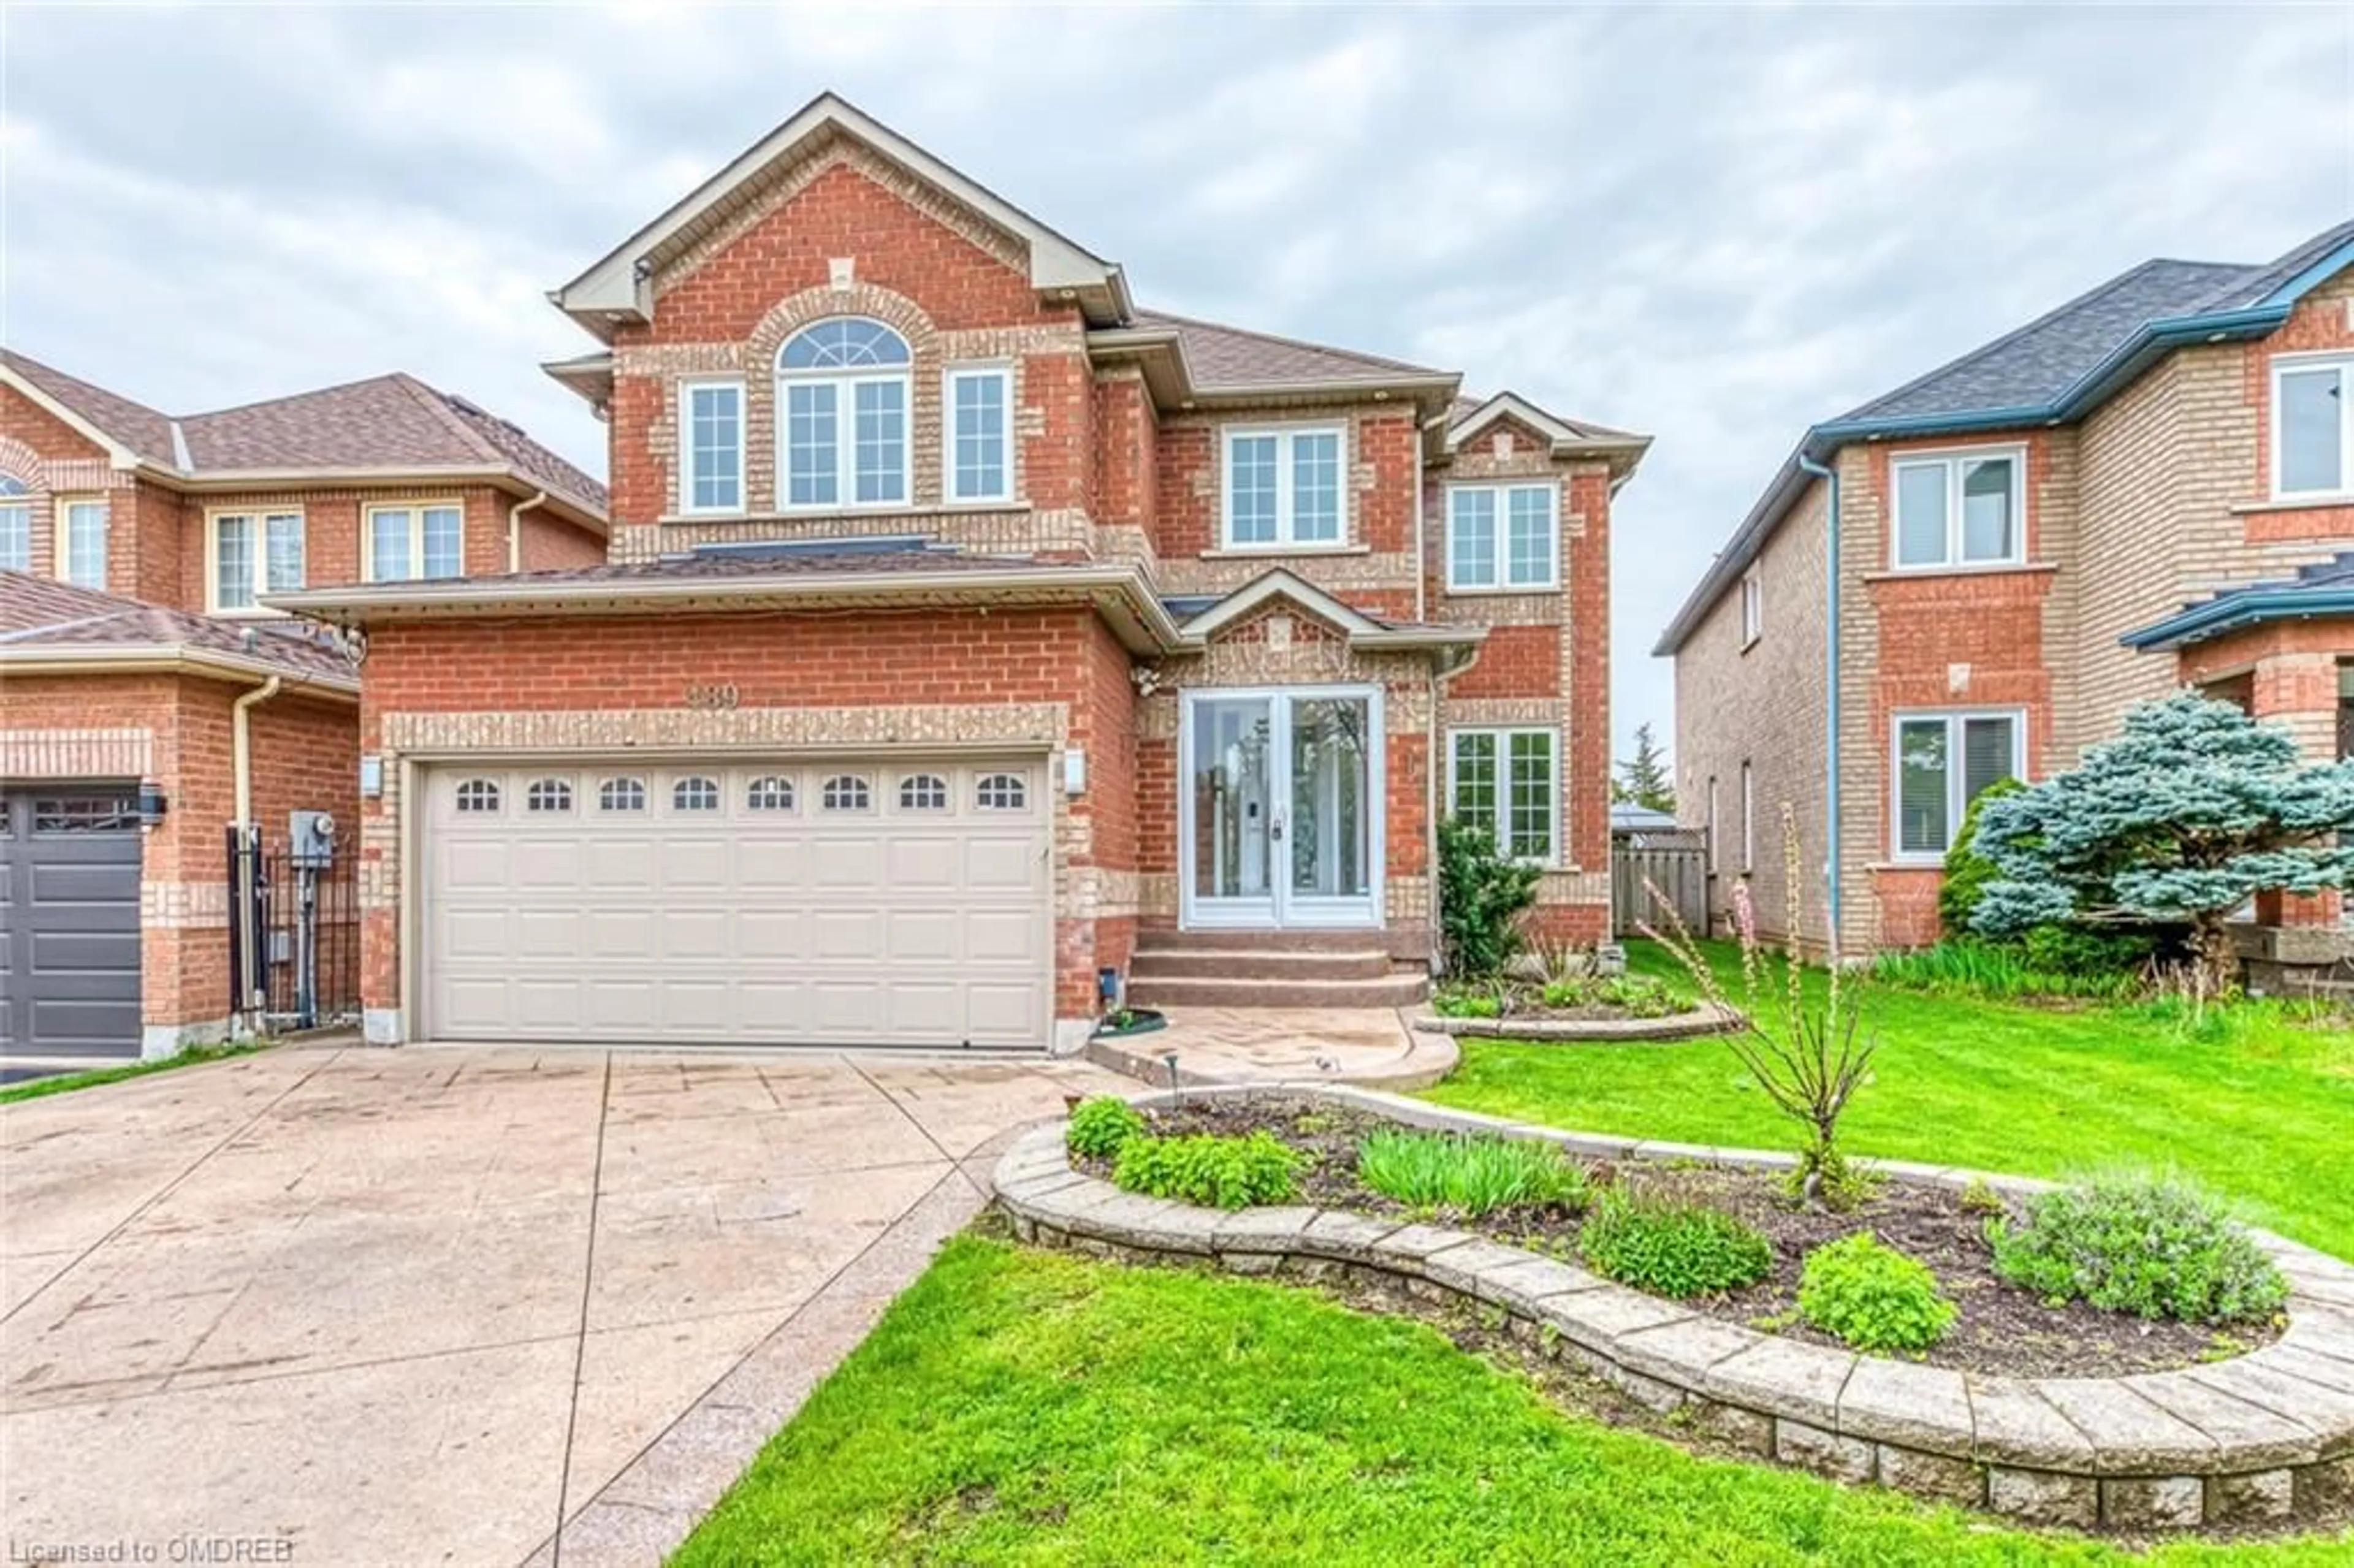 Home with brick exterior material for 489 Winfield Terr, Mississauga Ontario L5R 3V1